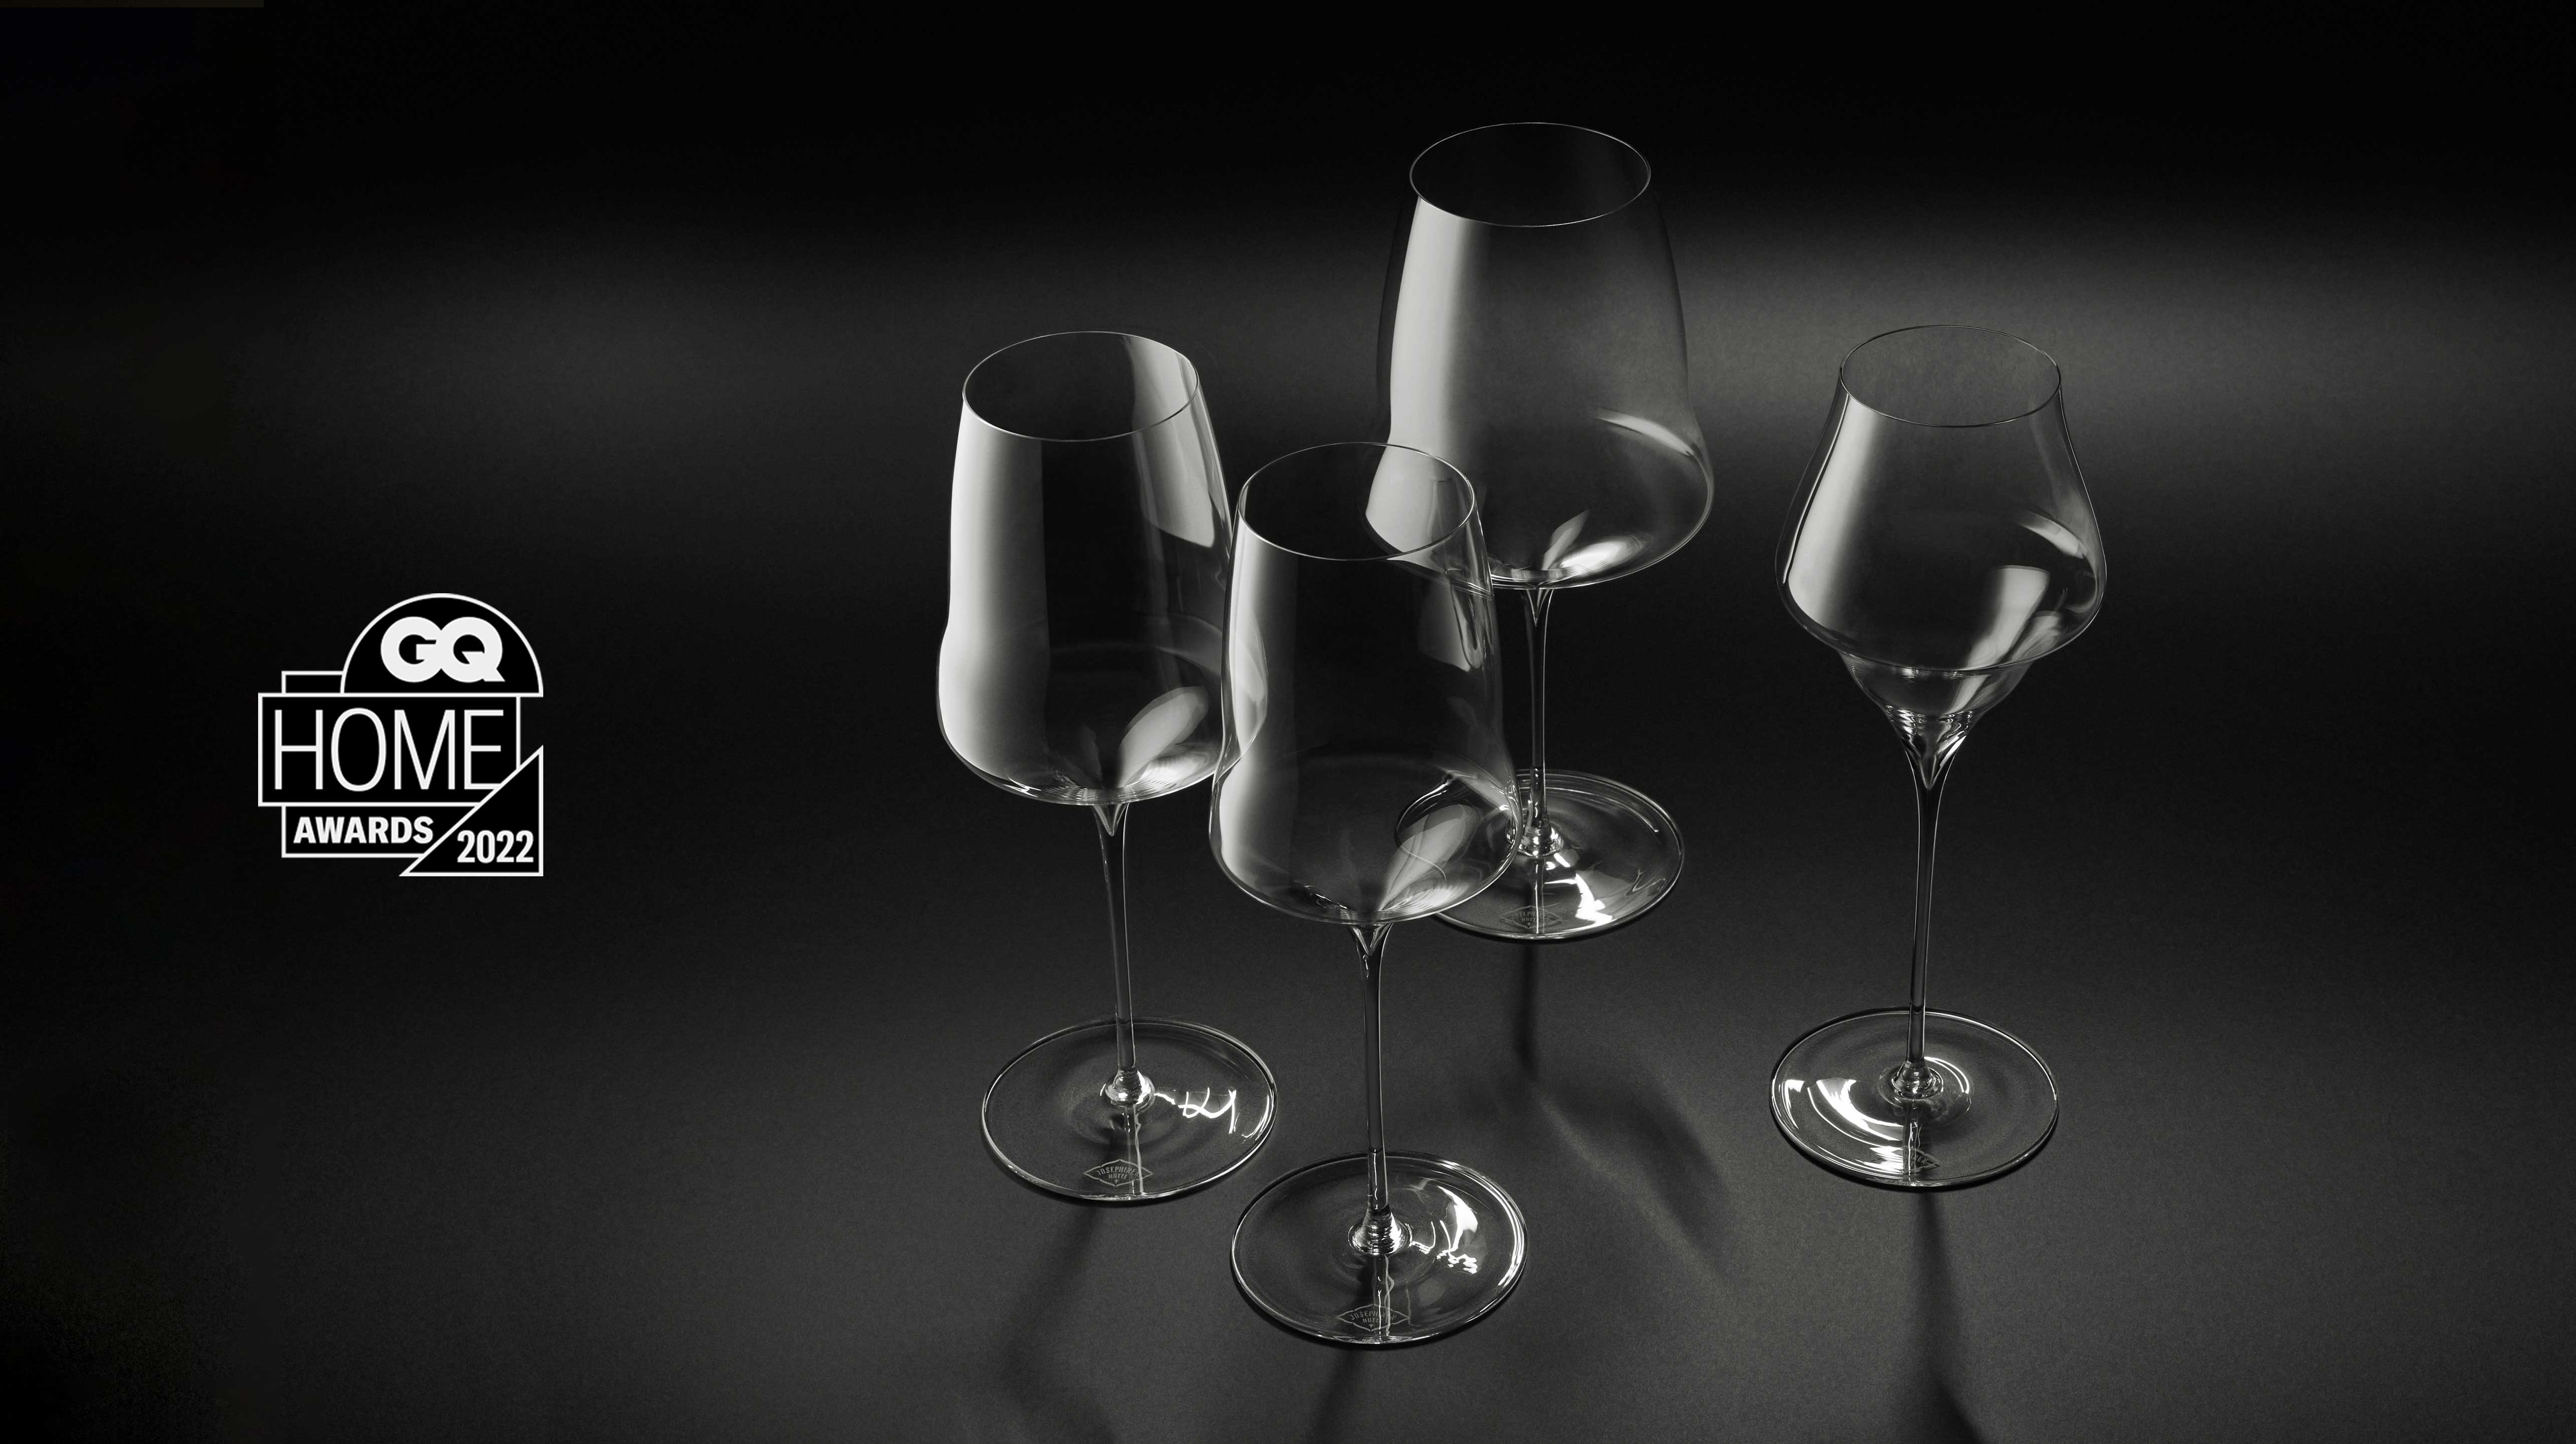 JOSEPHINE Wine Glass Collection Wins The GQ 2022 Home Awards